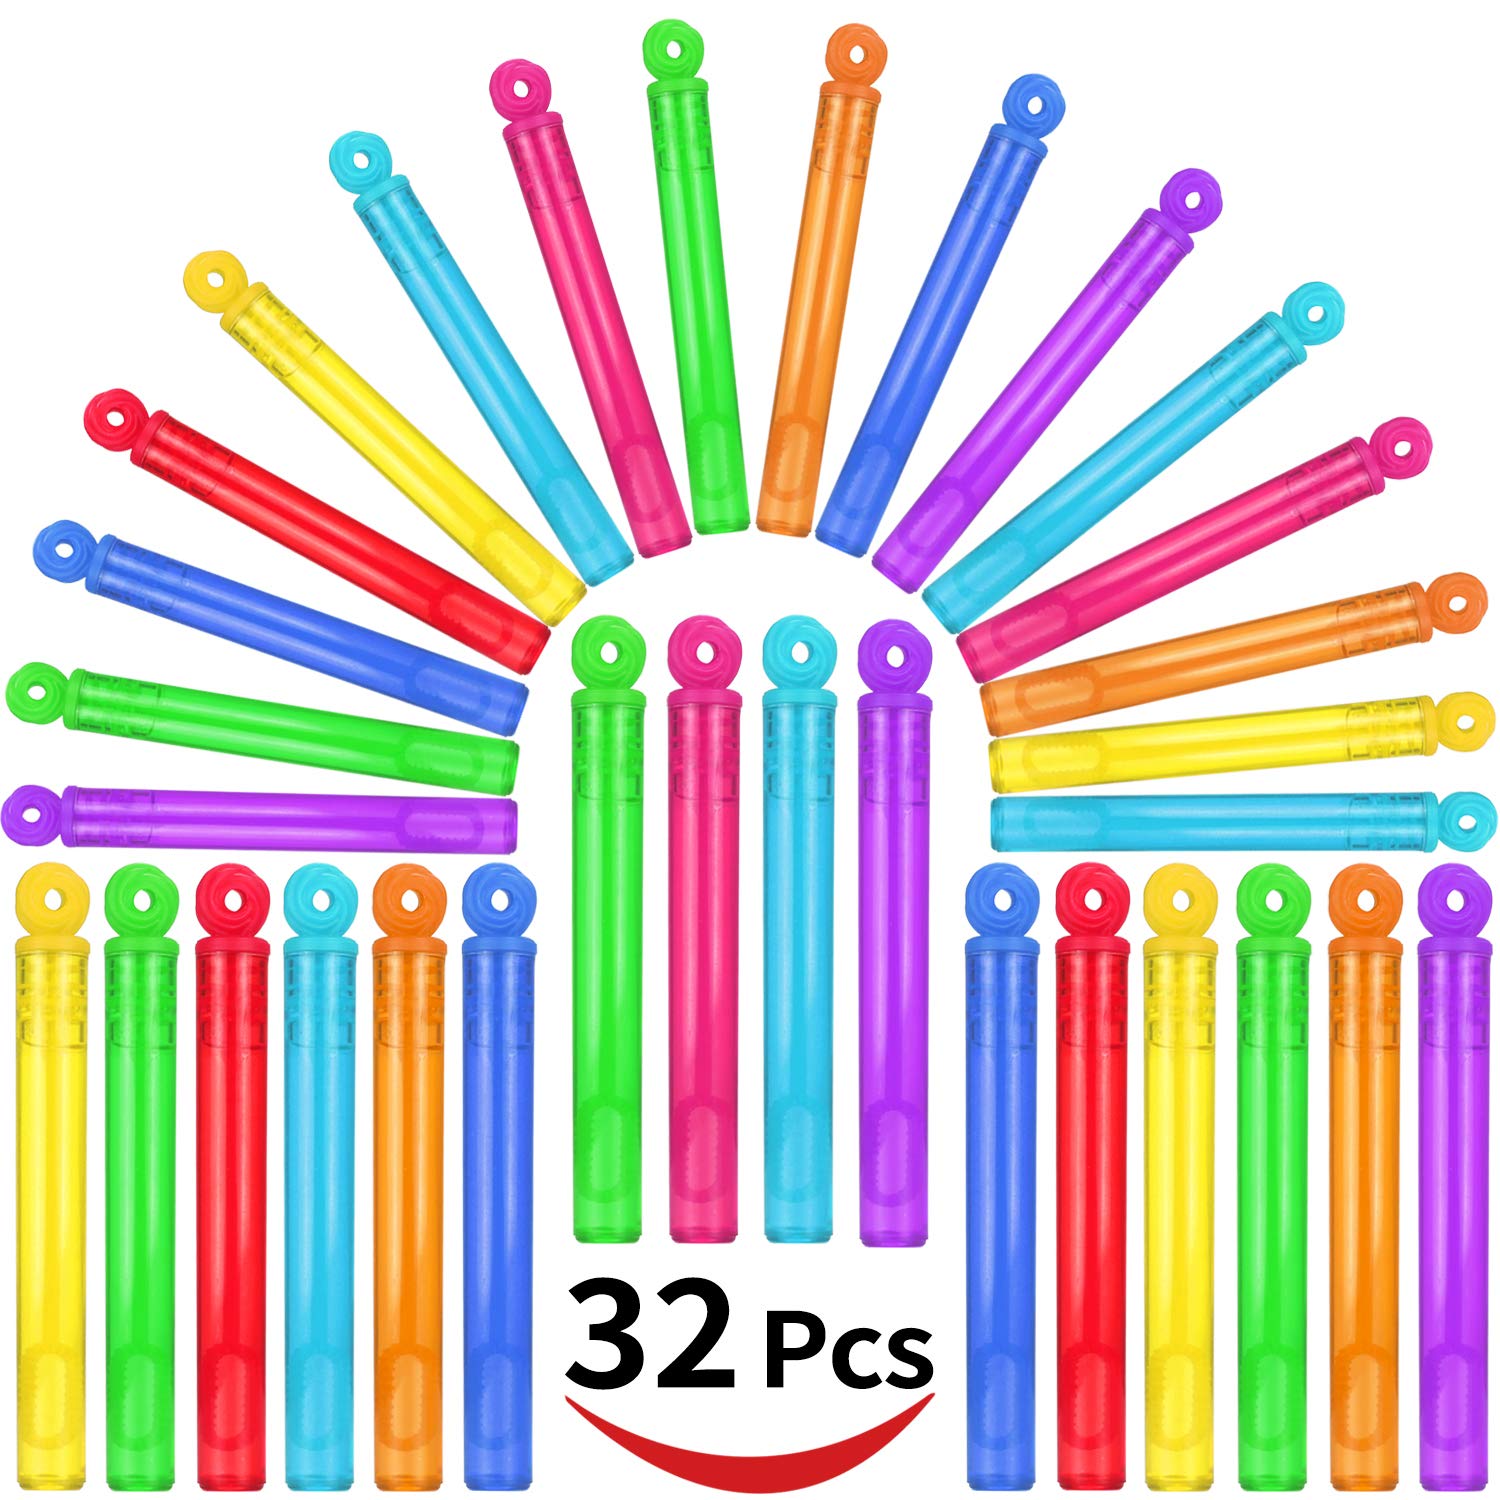 32-Piece 8 Colors Mini Bubble Wands Assortment Party Favors Toys for Kids Child, Christmas Celebration,Thanksgiving New Year, Themed Birthday,Wedding, Bath Time,Summer Outdoor Gifts for Girls Boys